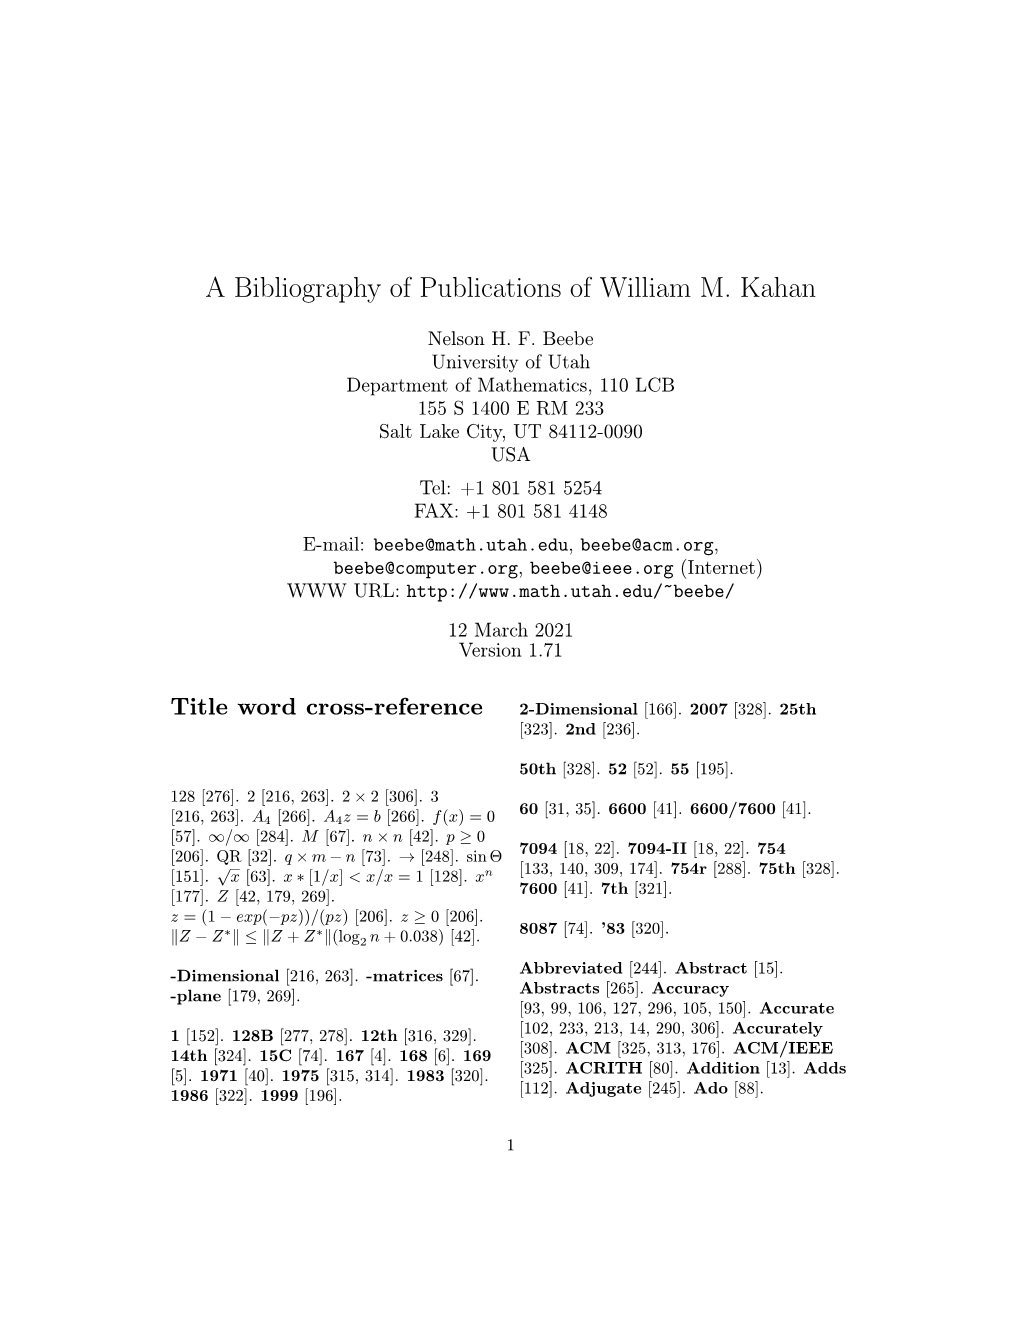 A Bibliography of Publications of William M. Kahan